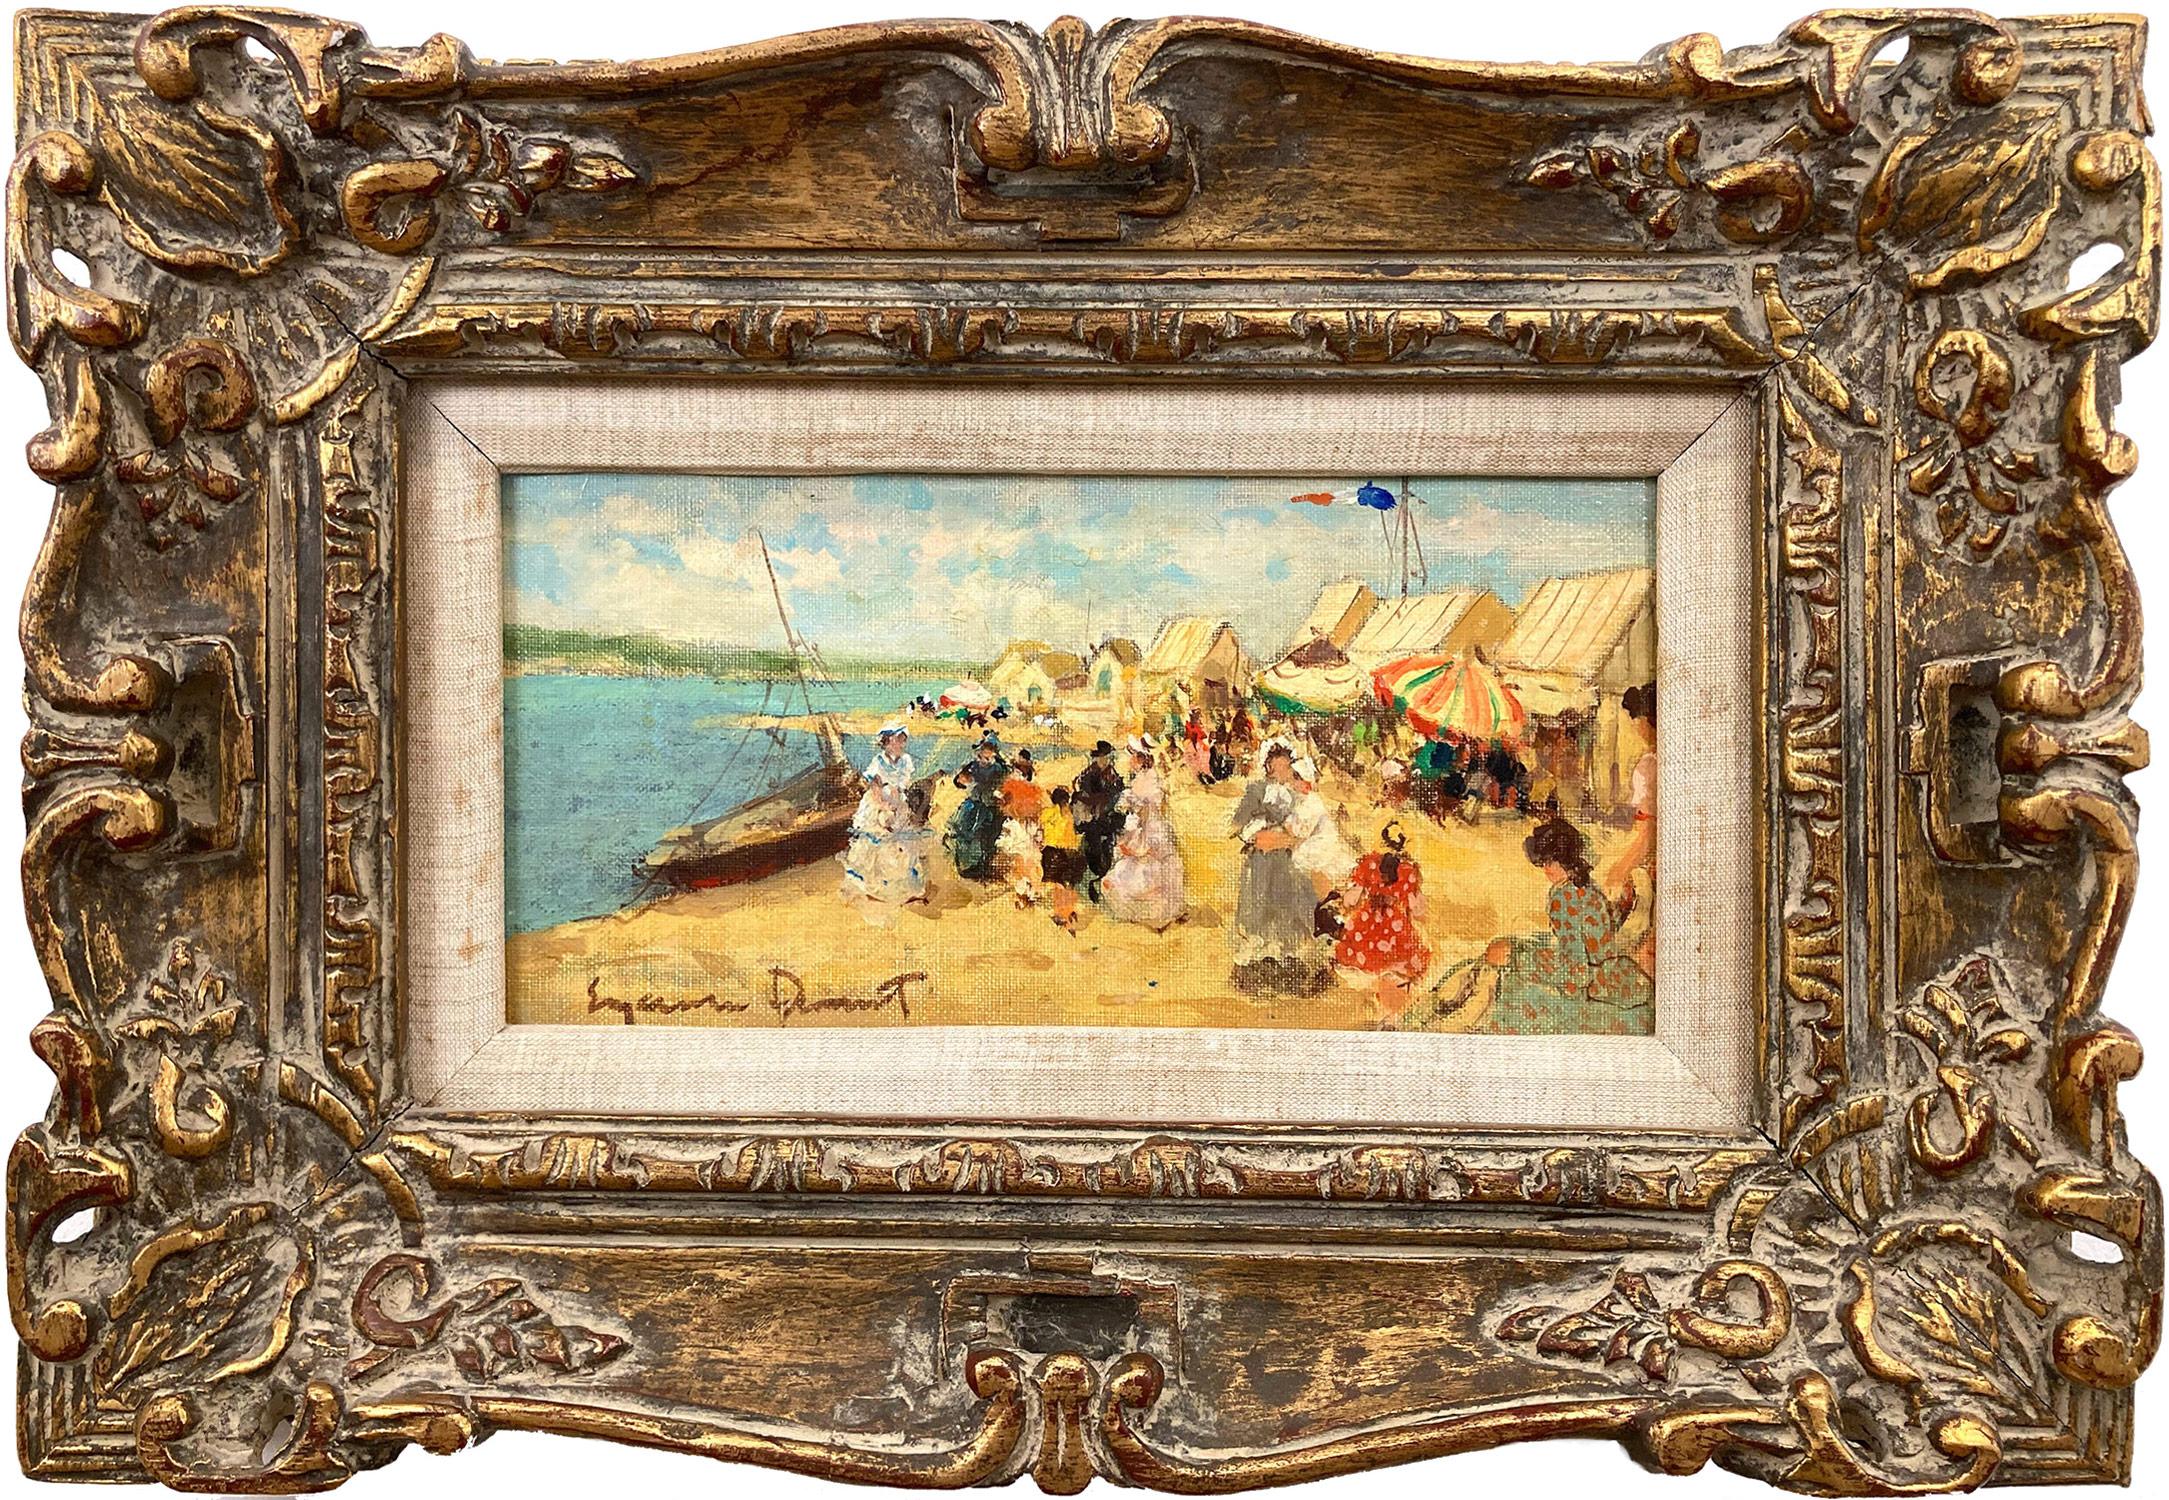 Suzanne Demarest  Figurative Painting - "Beach Scene With Figures" 20th Century American Impressionist Oil Painting